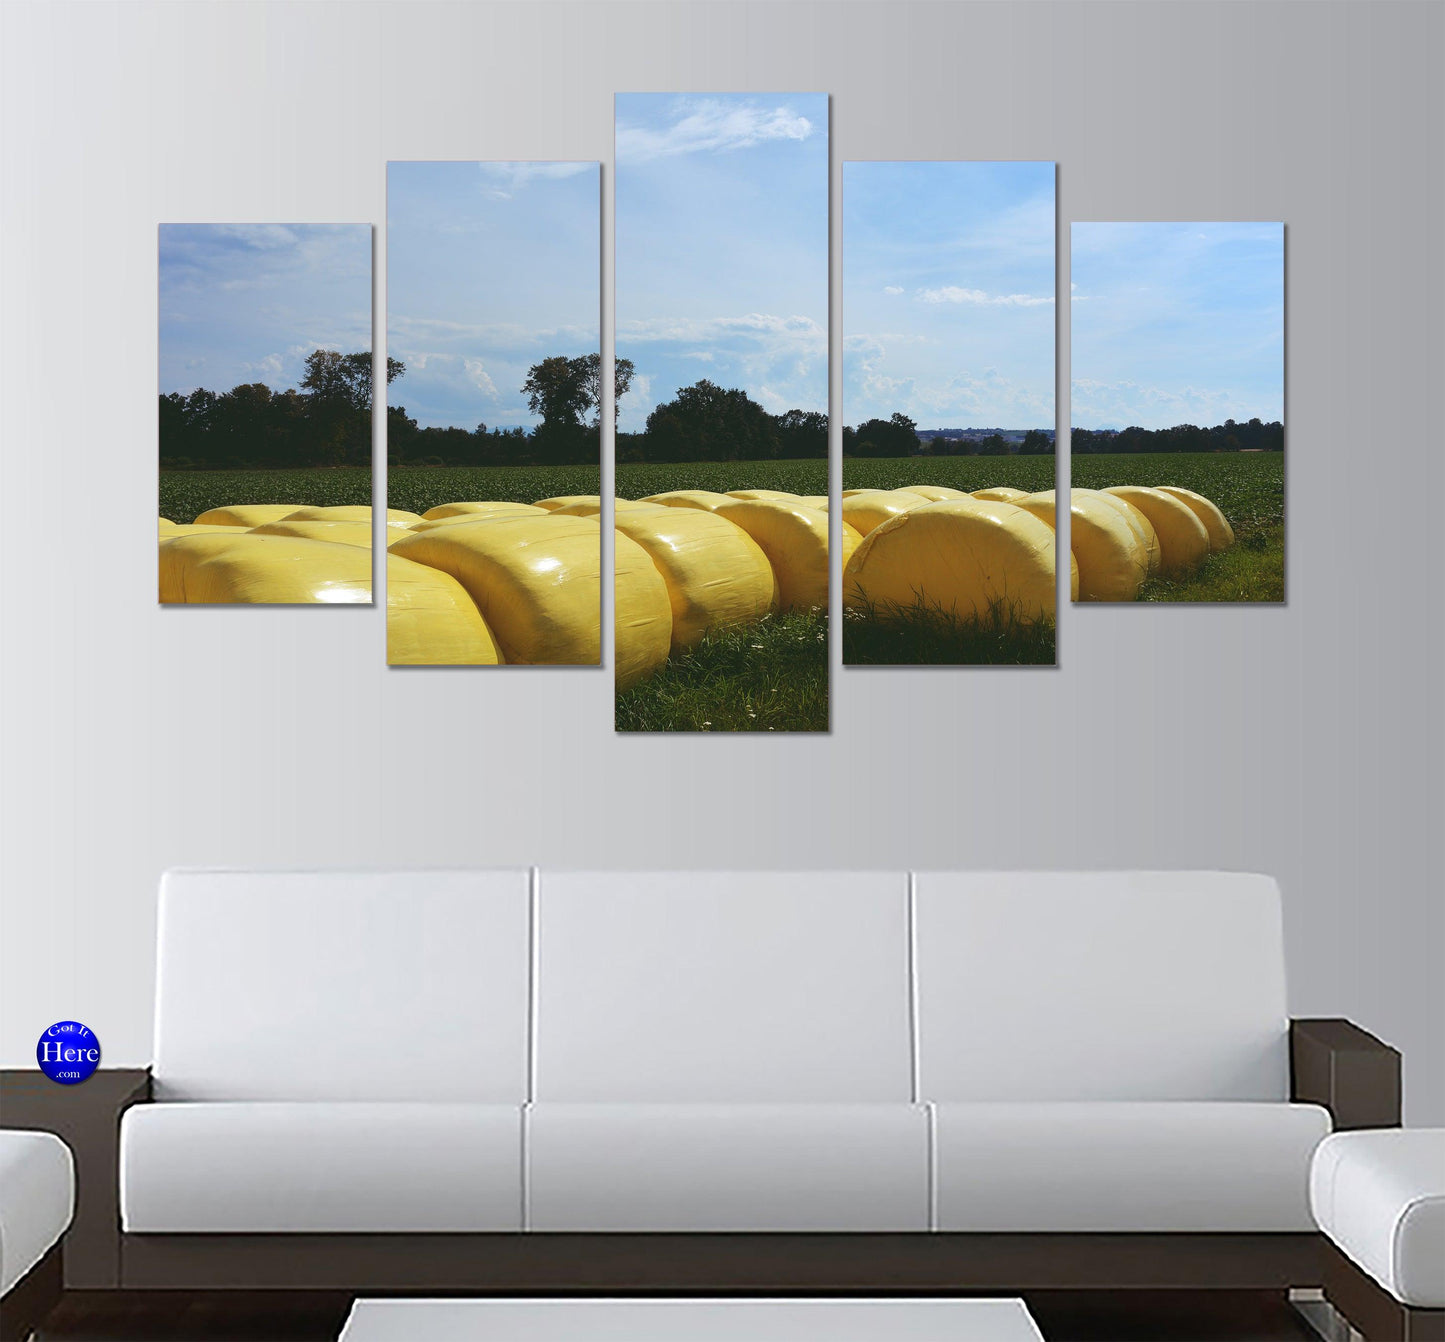 Hay Bales Wrapped 5 Panel Canvas Print Wall Art - GotItHere.com